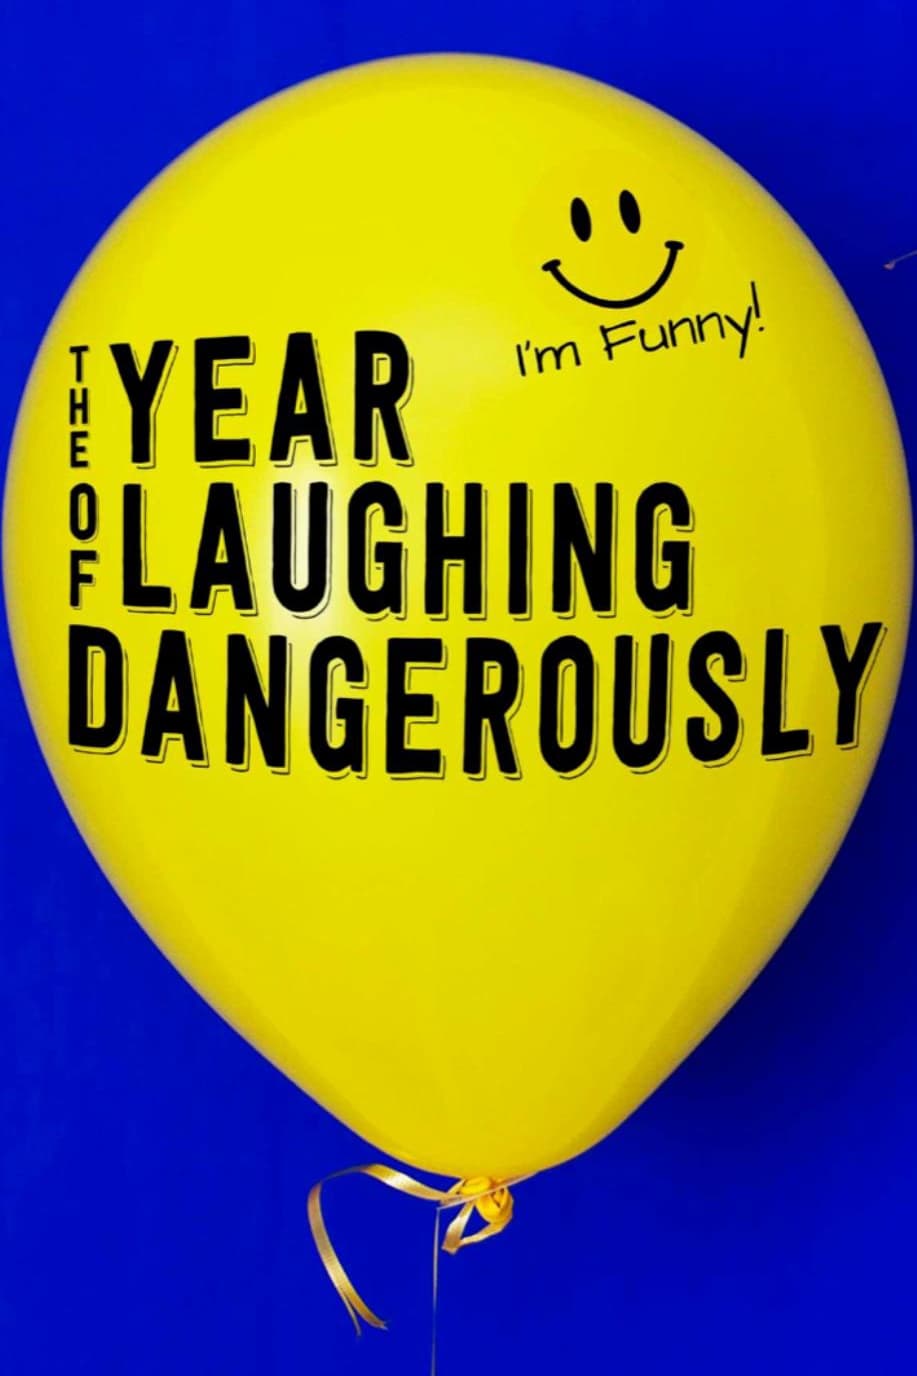 The Year of Laughing Dangerously